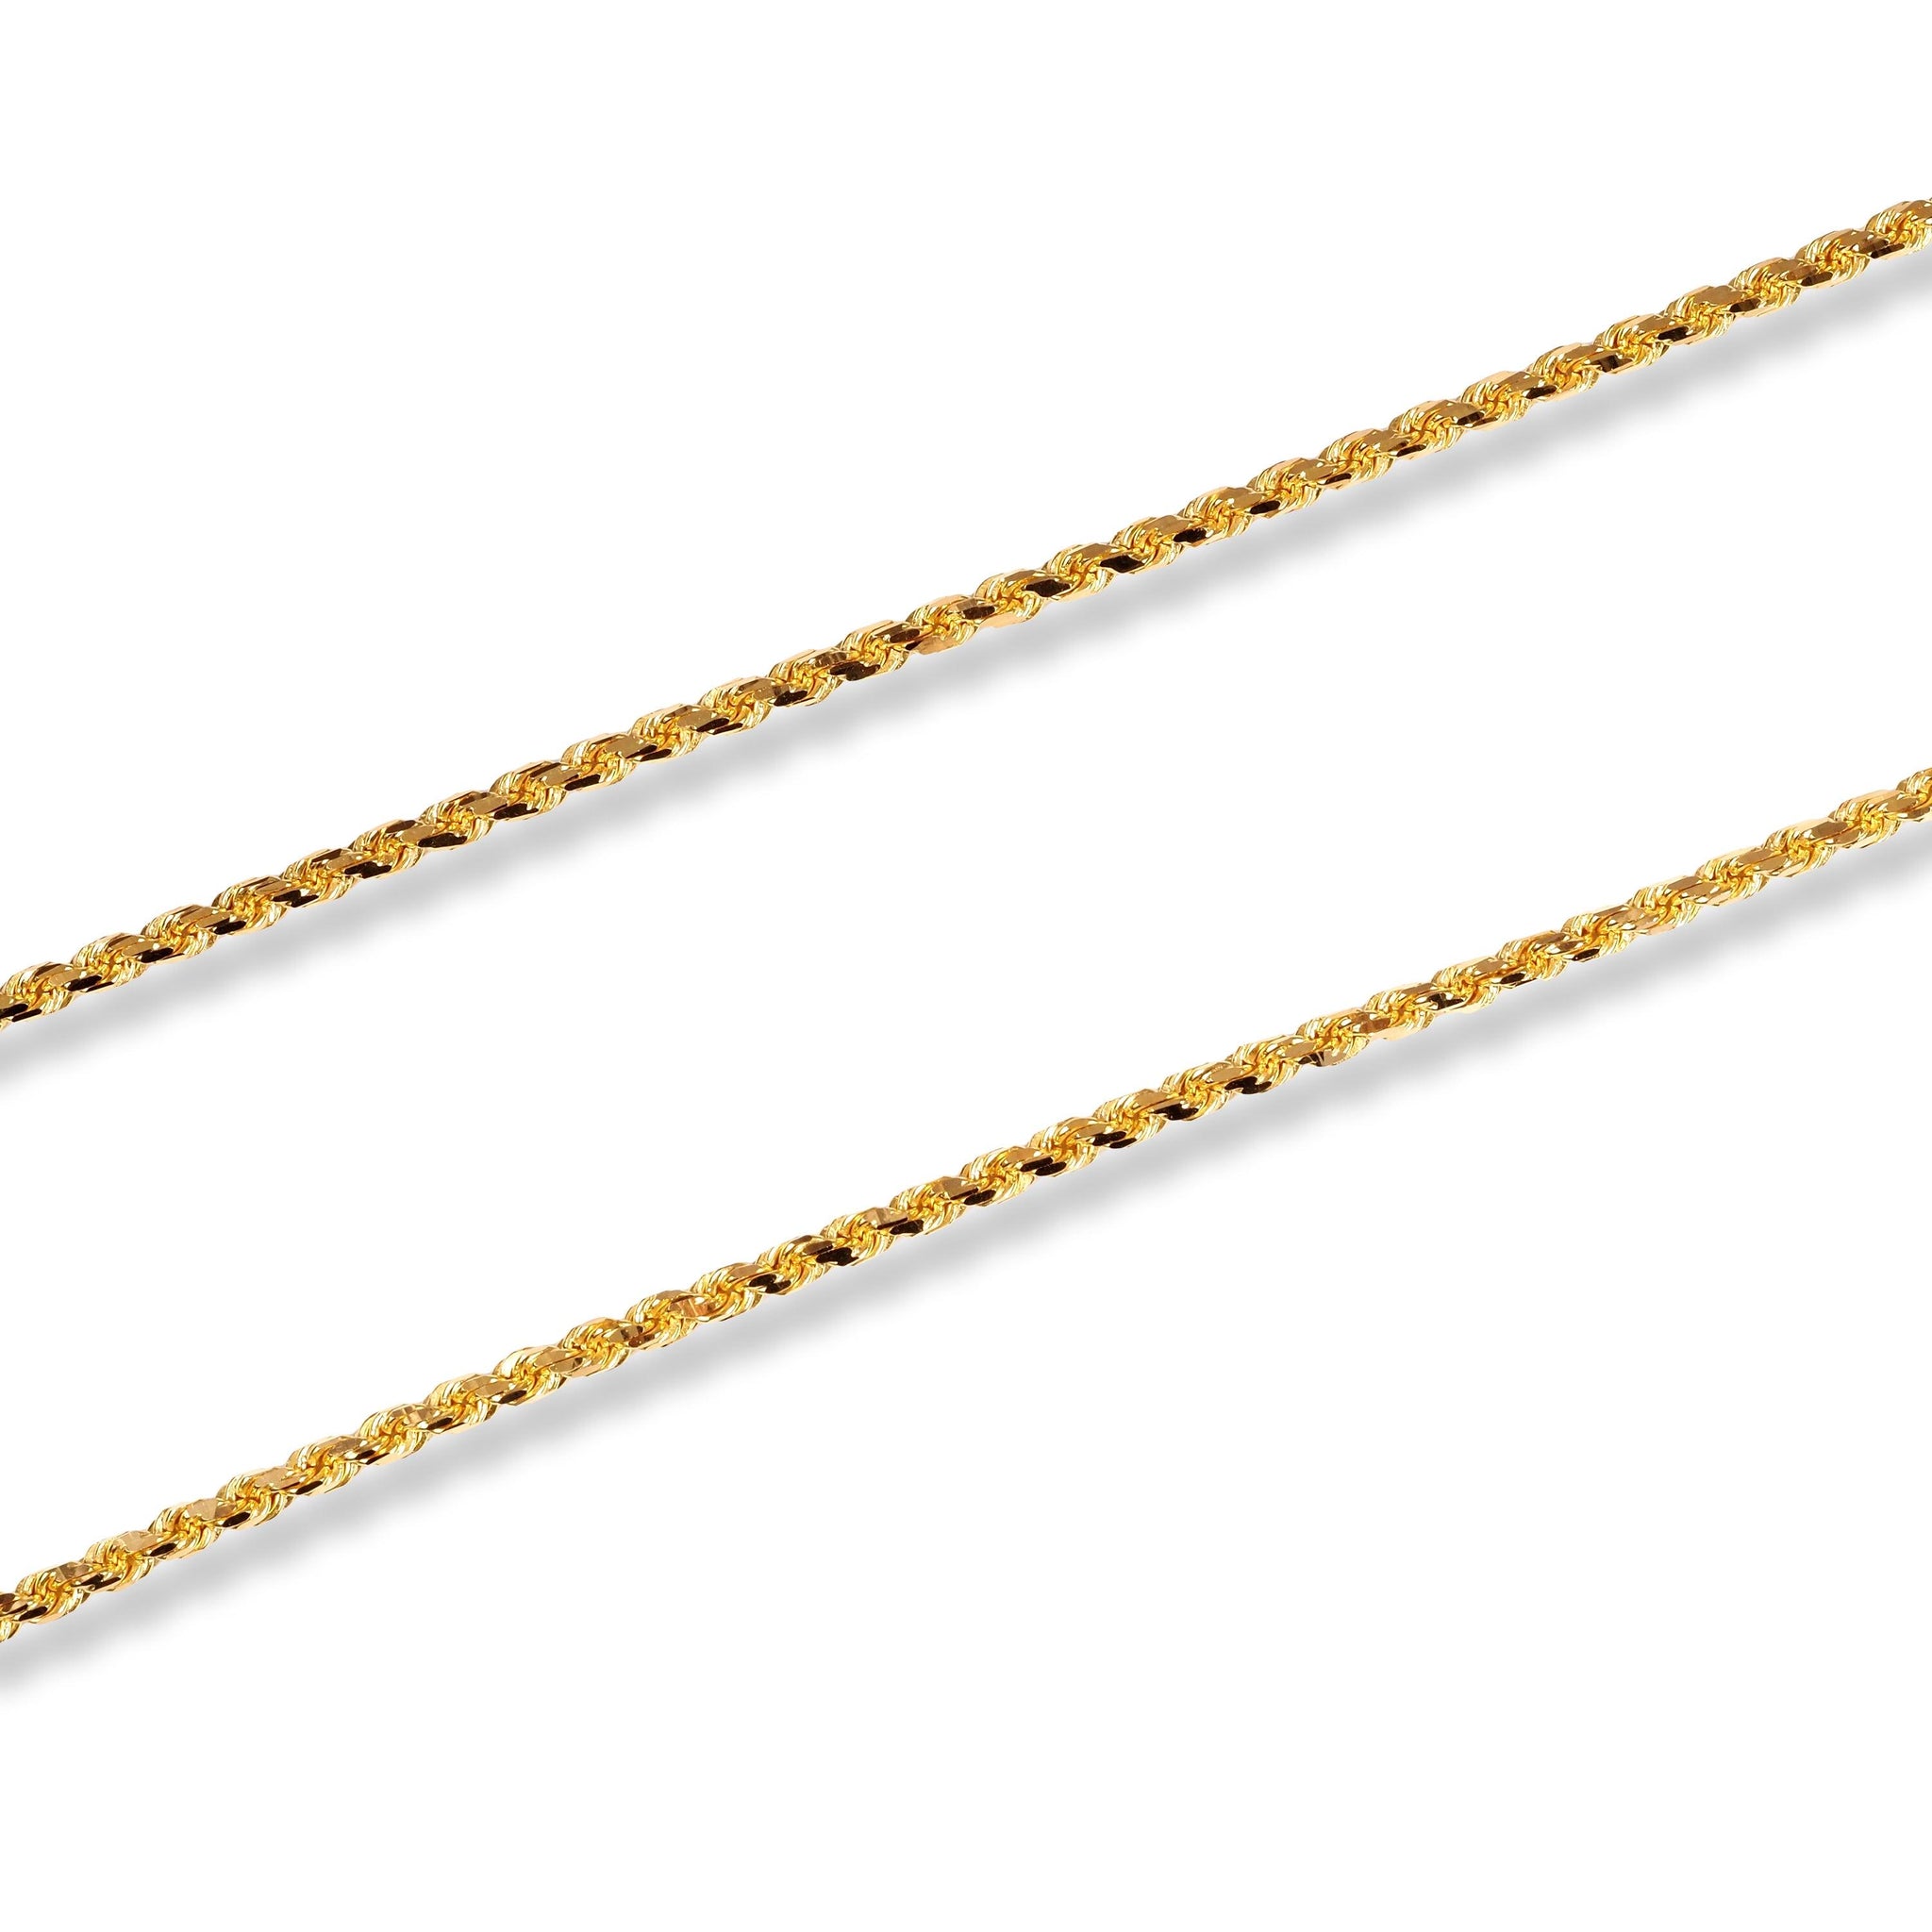 22ct Gold Filed Solid Rope Chain with Lobster Clasp C-1216